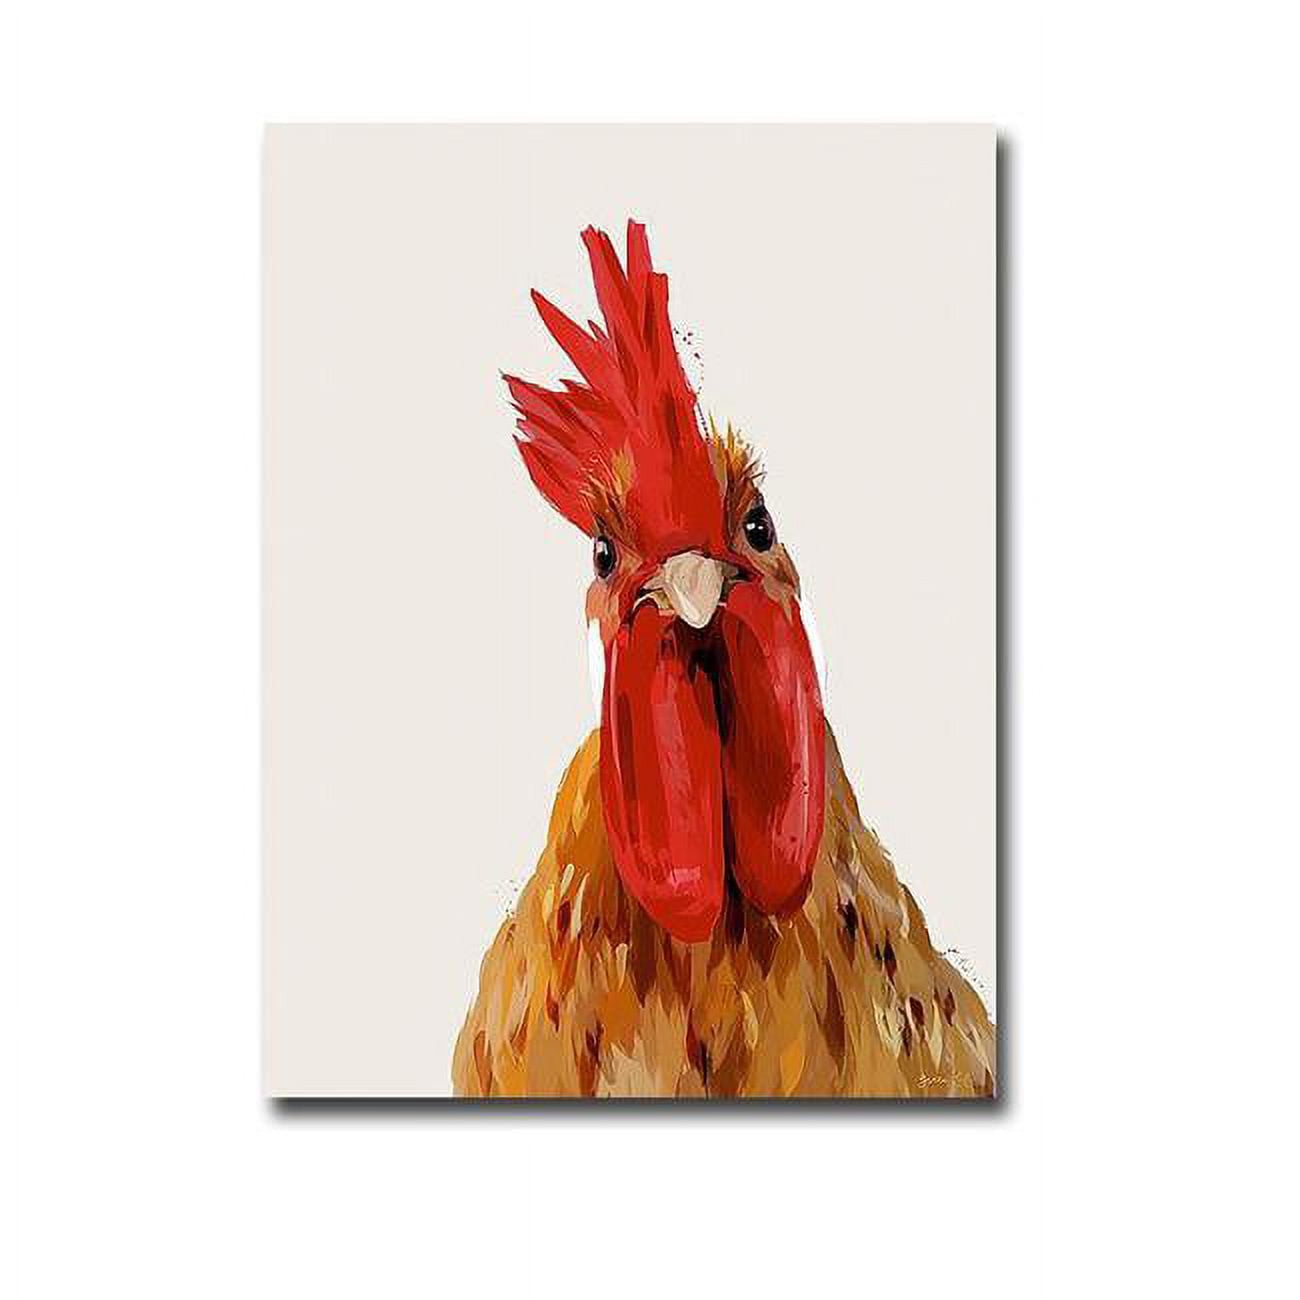 1216am439ig Chicken Or The Egg By Green Lili Premium Gallery-wrapped Canvas Giclee Art - 12 X 16 X 1.5 In.